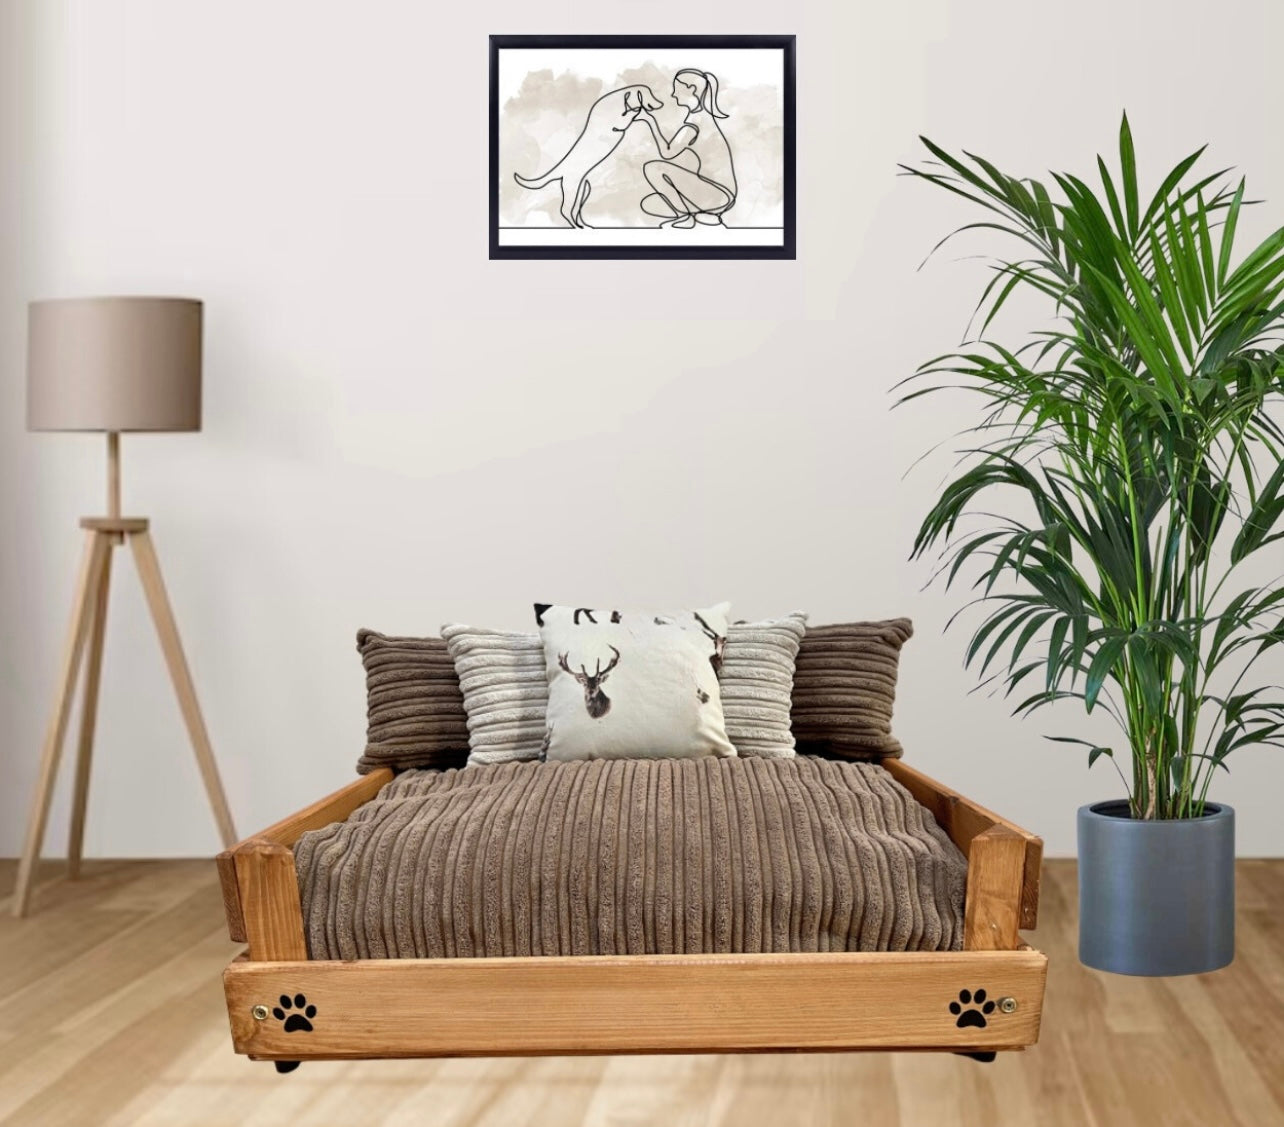 Wooden Personalised Cat Bed (46 x 59cm) - Royal Oak & Stag